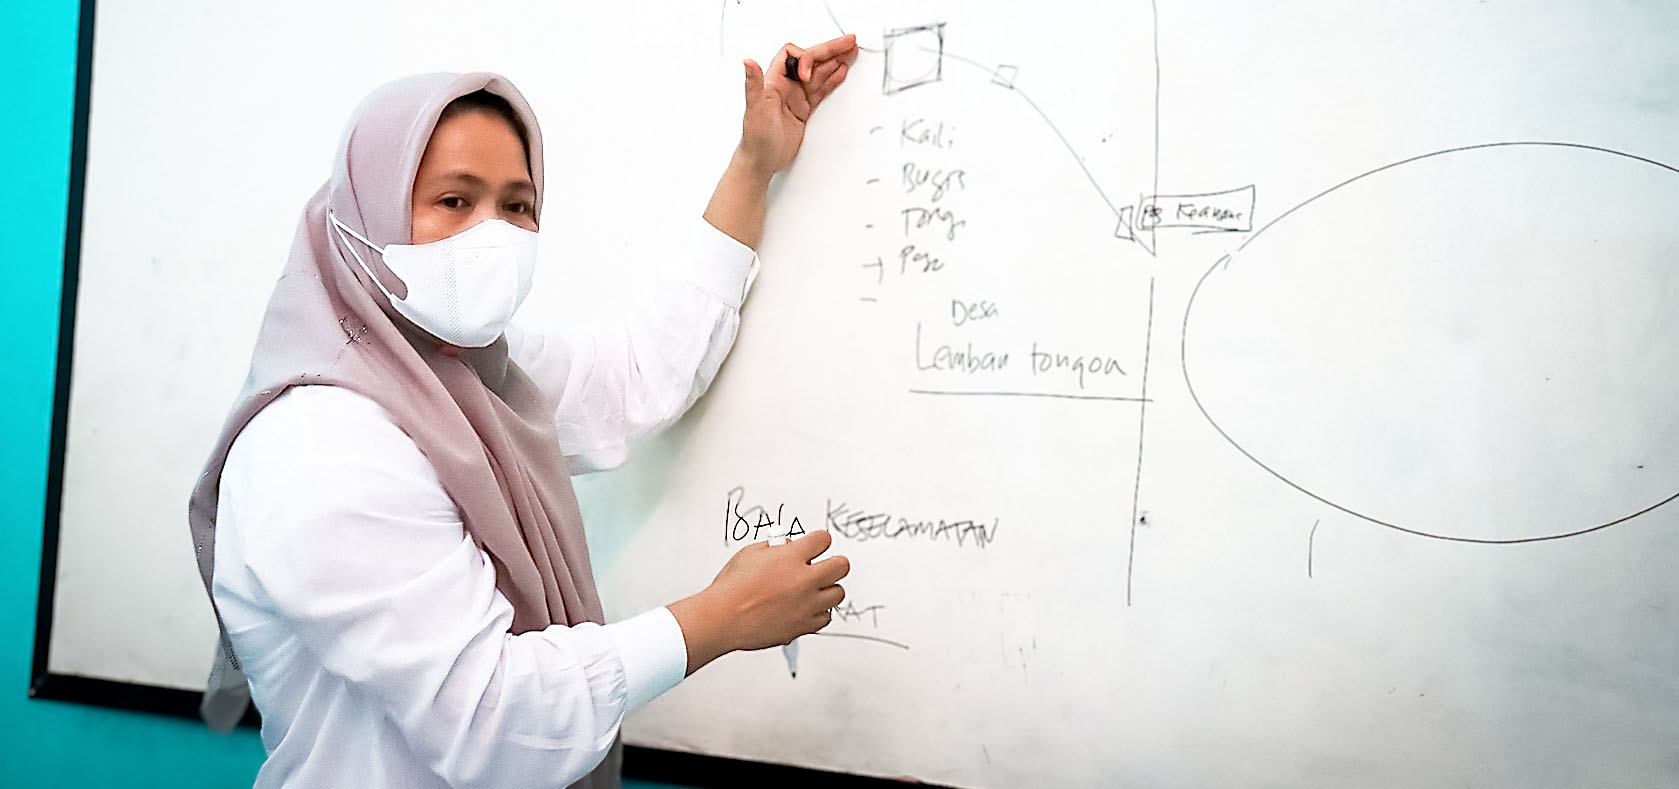 A woman wearing hijab is explaining something in from of a whiteboard.